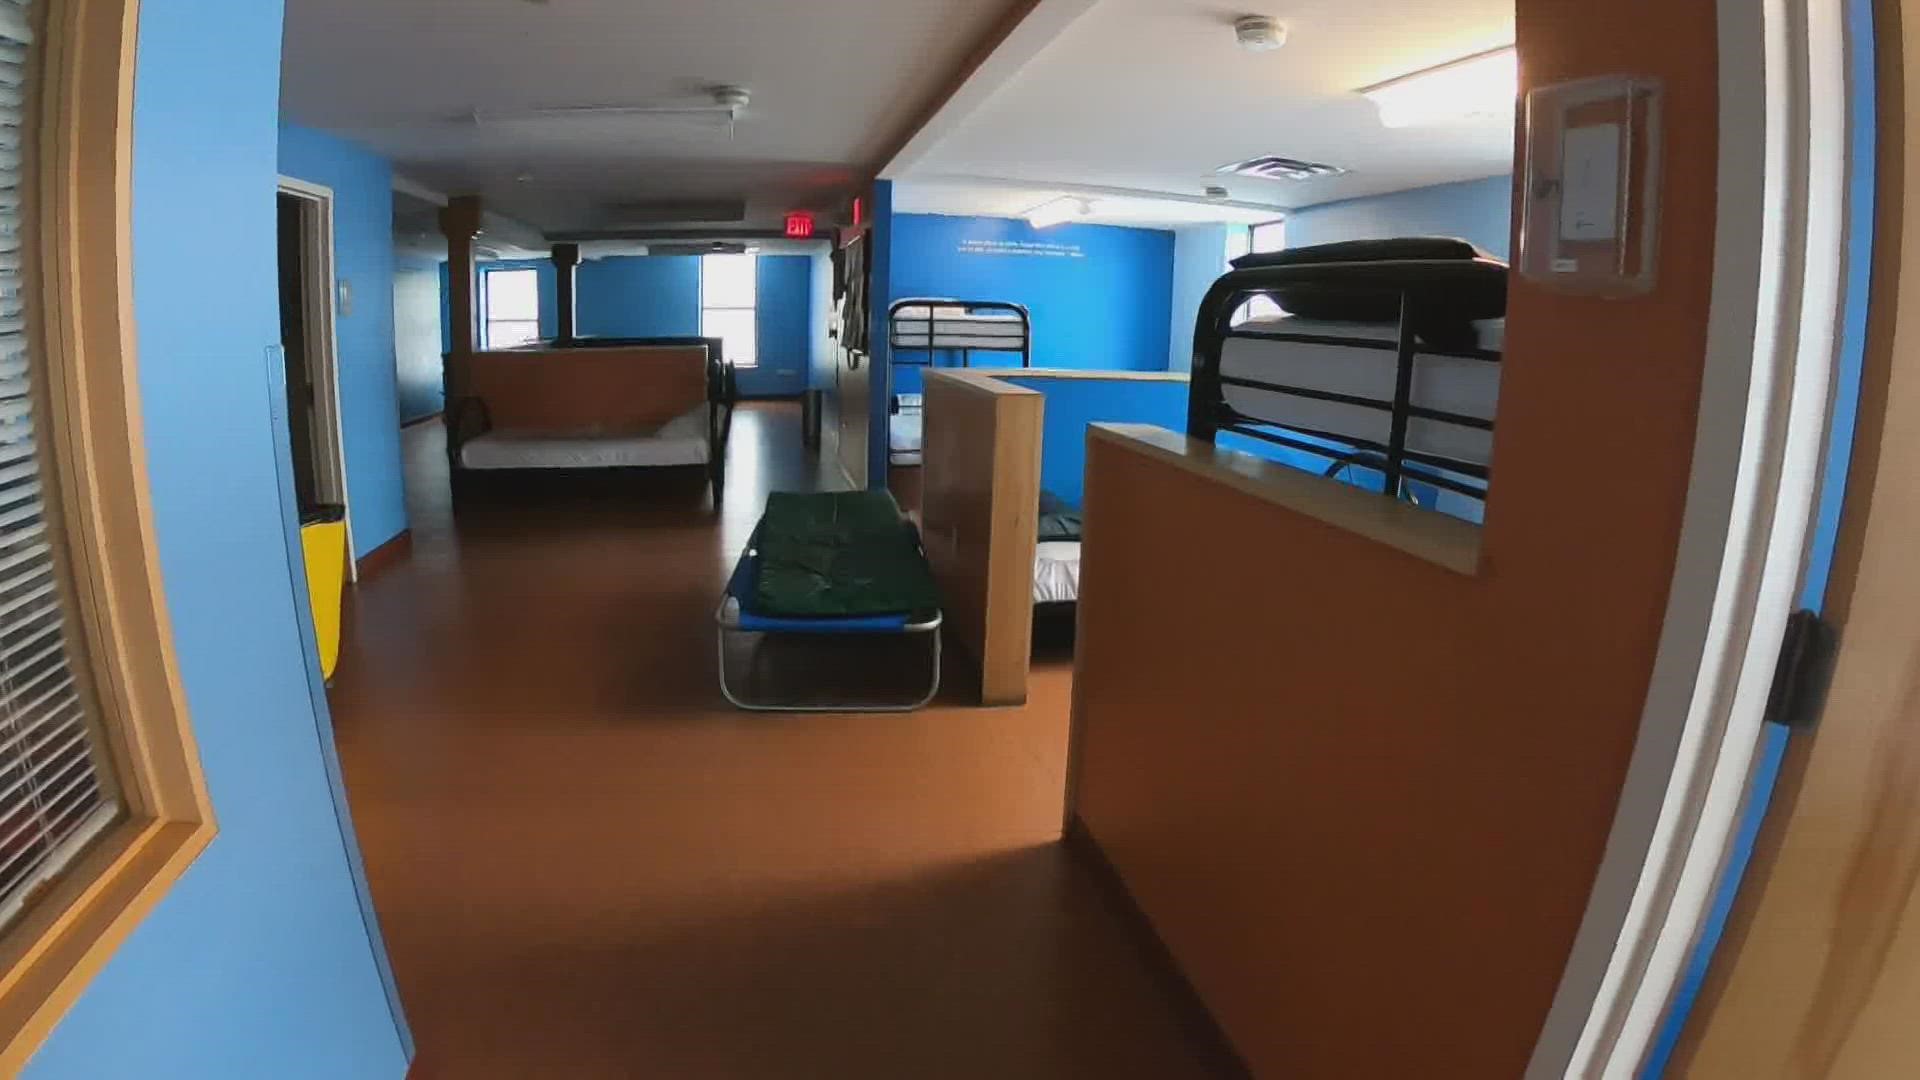 Preble Street said its 24-bed Joe Kreisler Teen Shelter has been at-capacity the majority of nights the past two weeks, as of Wednesday, June 8.